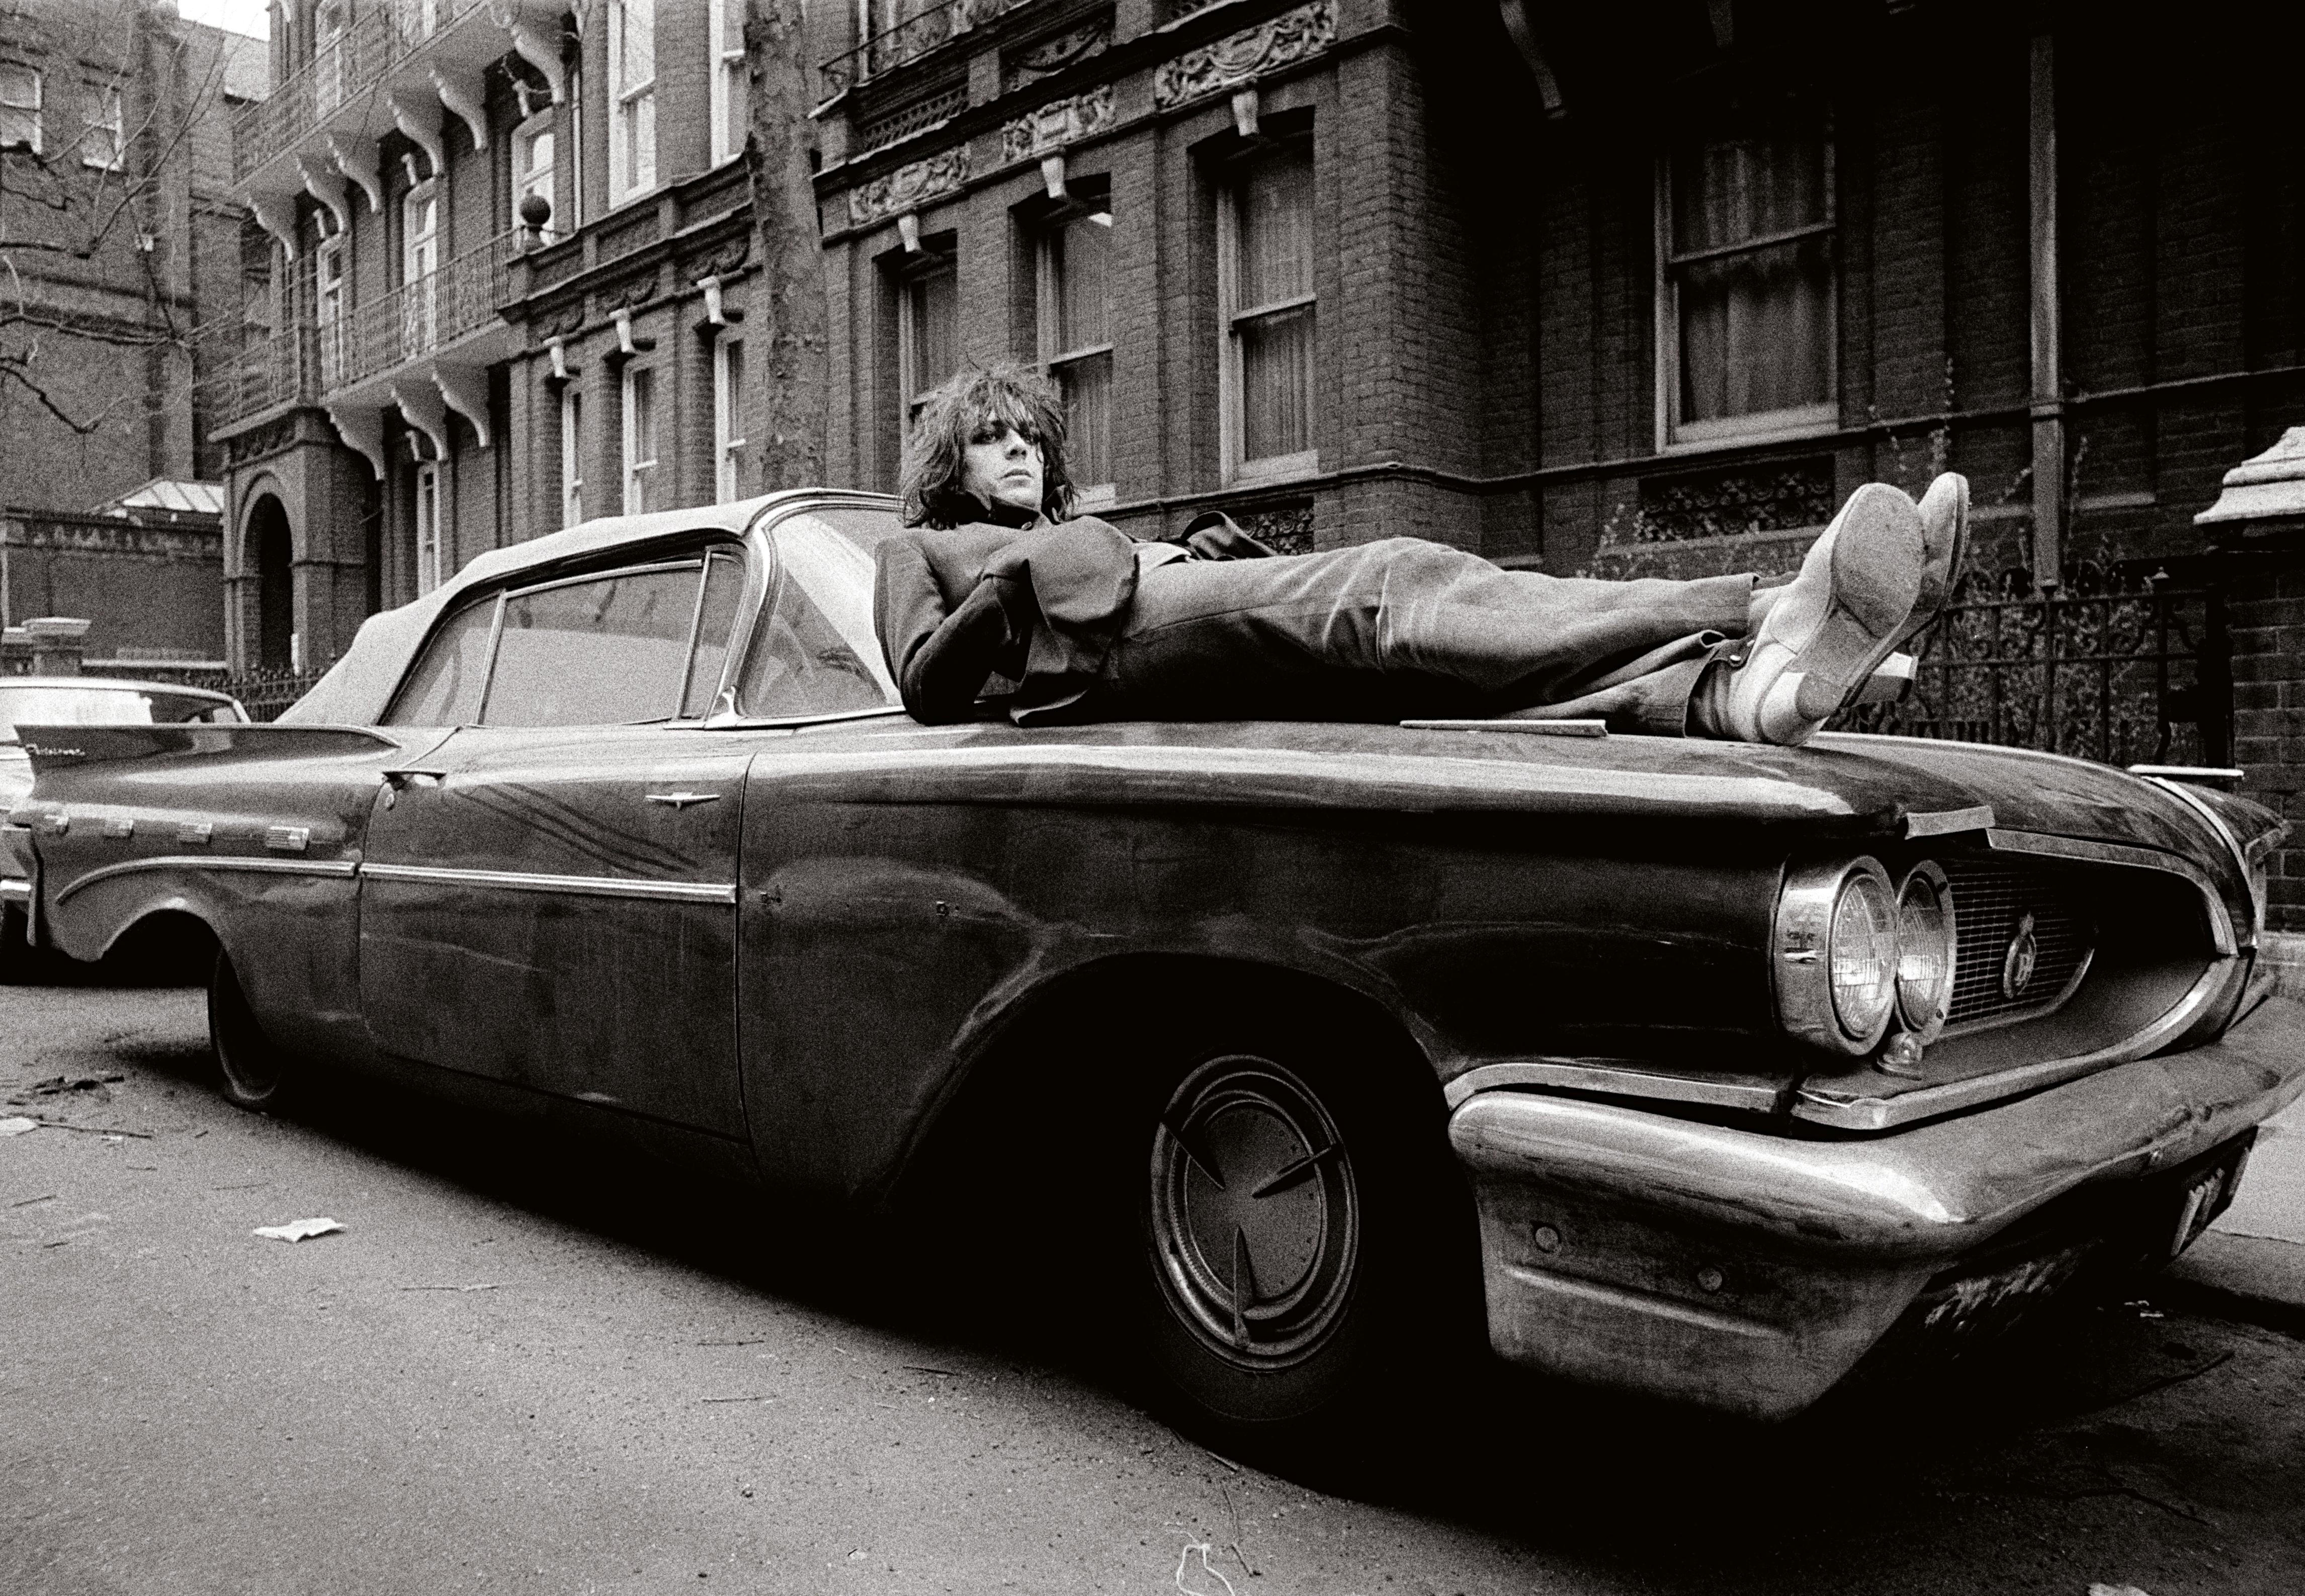 "Syd Barrett Laying on His Car" Photography 20" x 24" inch 29/50 by Mick Rock

Edition: 29/50
Signed and numbered by Mick Rock
Medium: Silver gelatin limited edition photographic print on paper

Pink Floyd founding member Syd Barrett rests on the